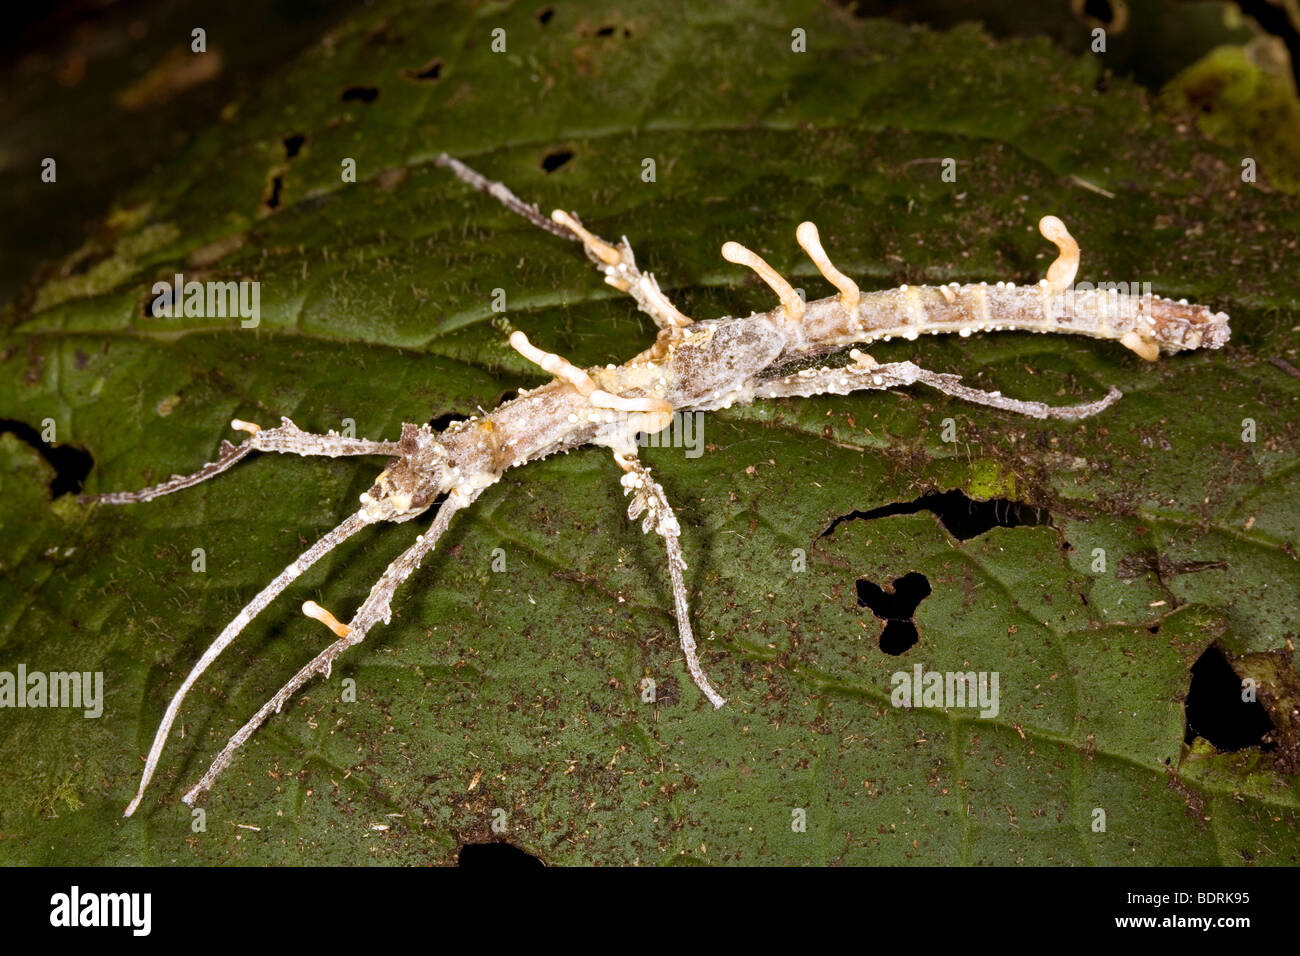 Stick insect parasitized by Cordyceps fungus Stock Photo